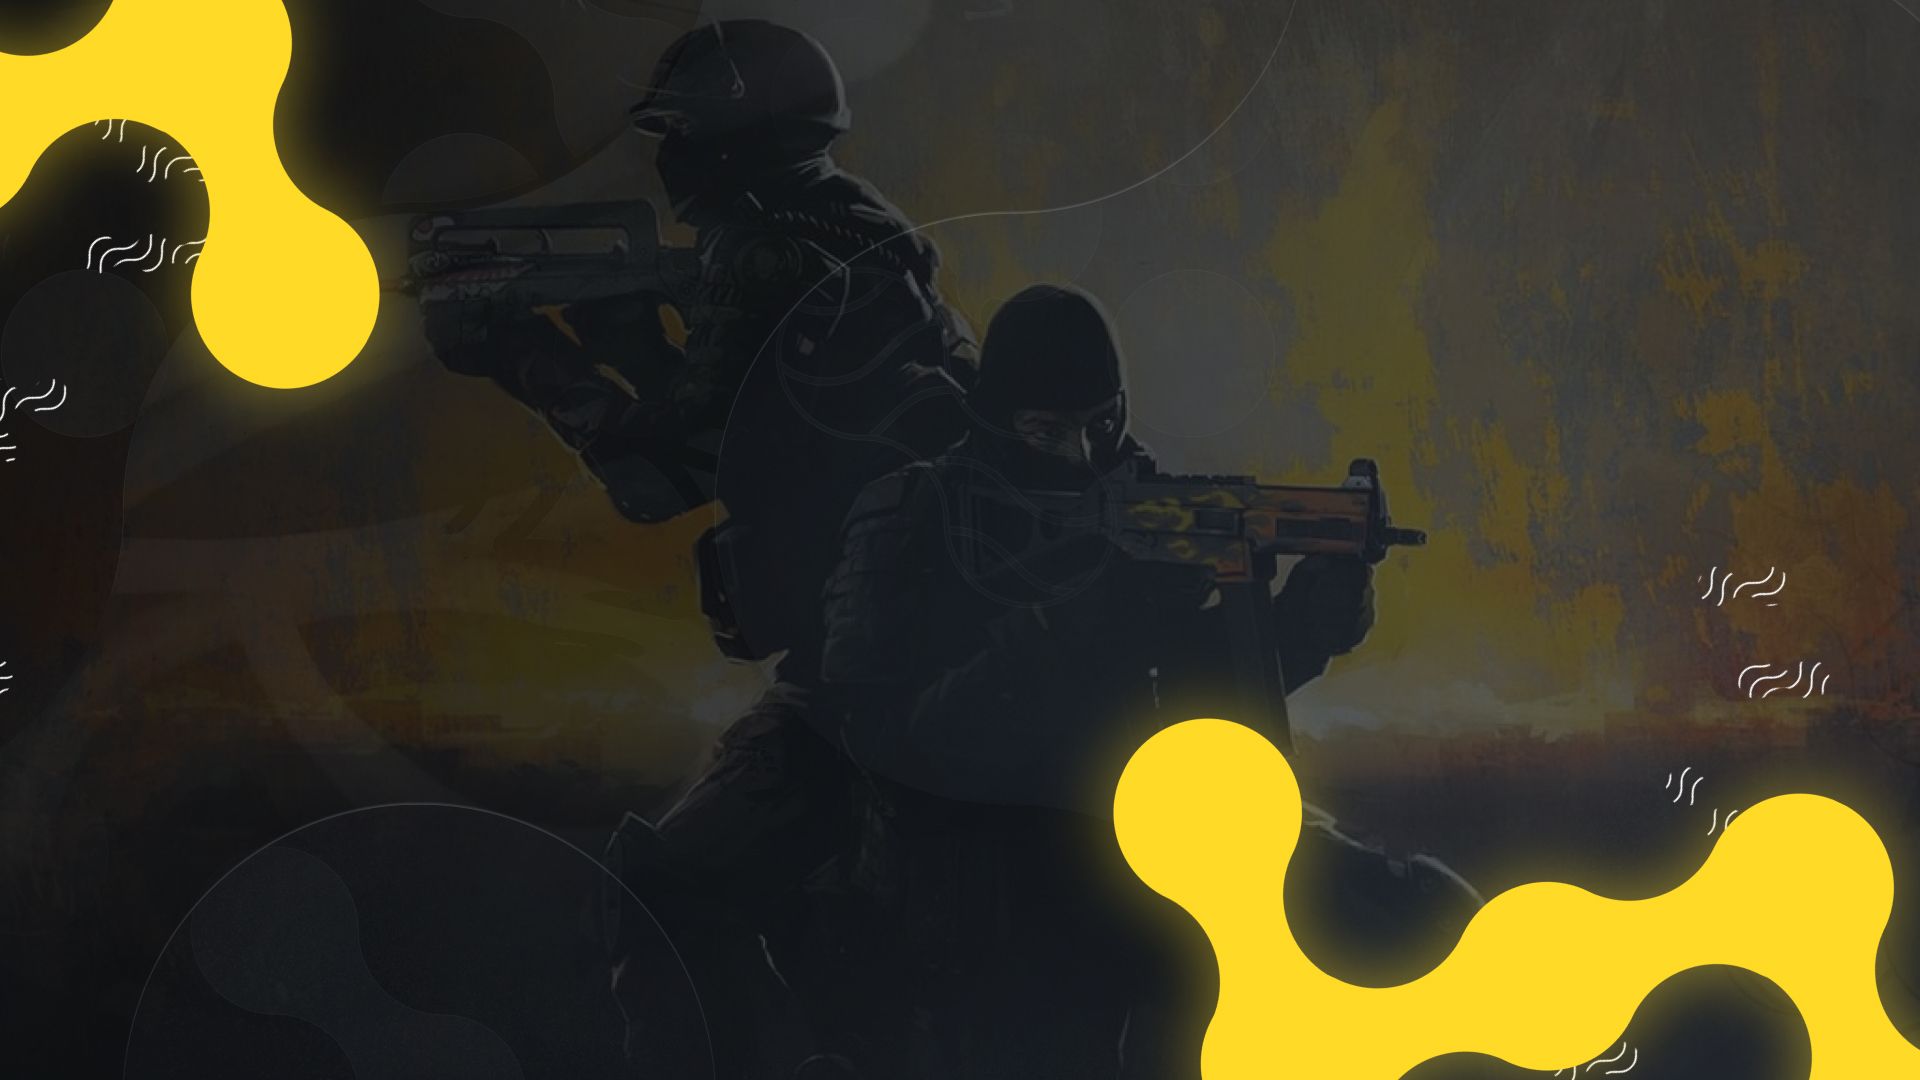 Will There Be A CS:GO Operation In 2023?